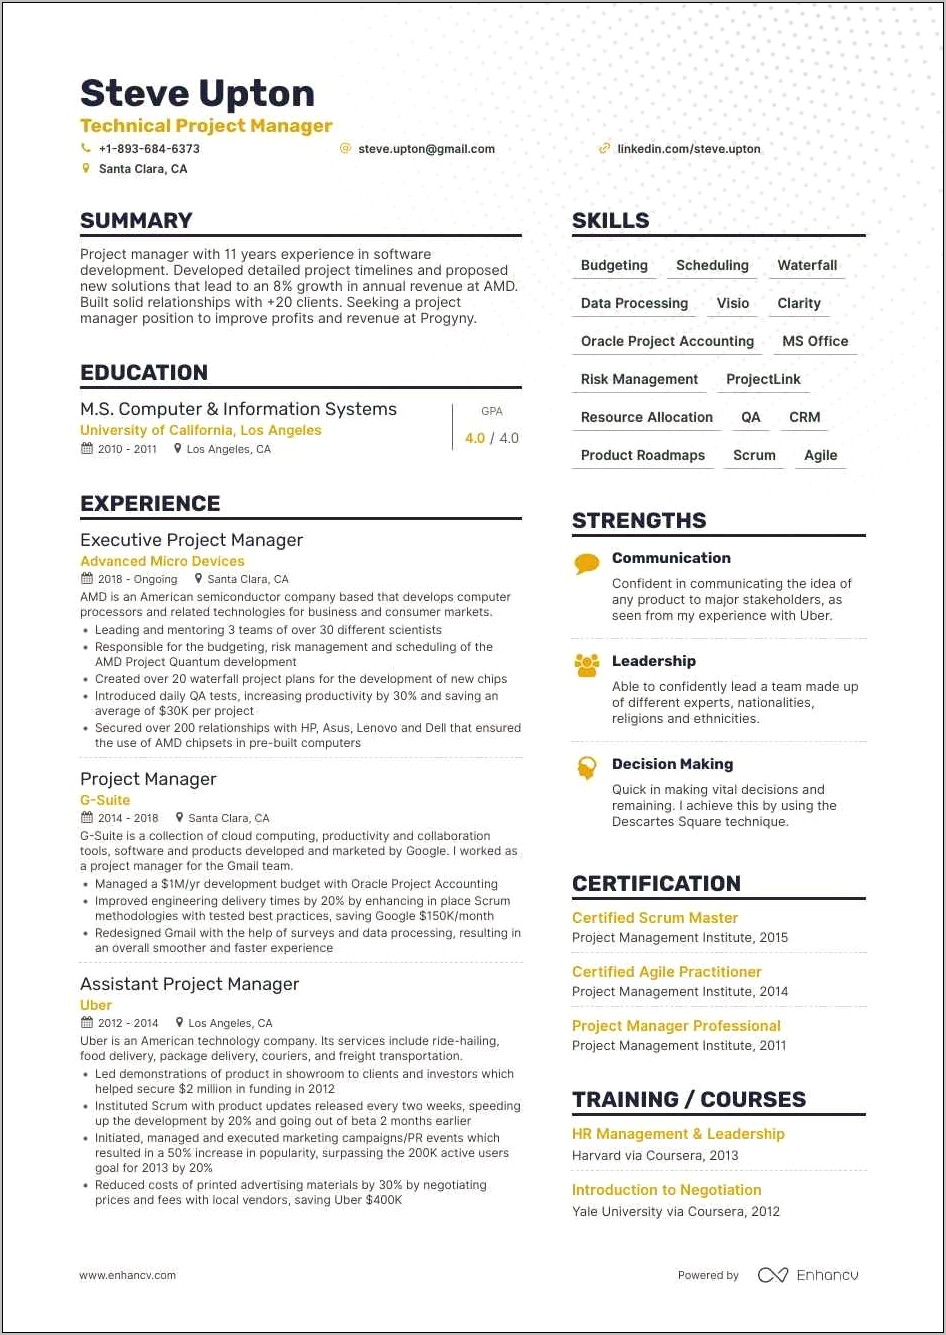 Example Project Manager Resume With Objective